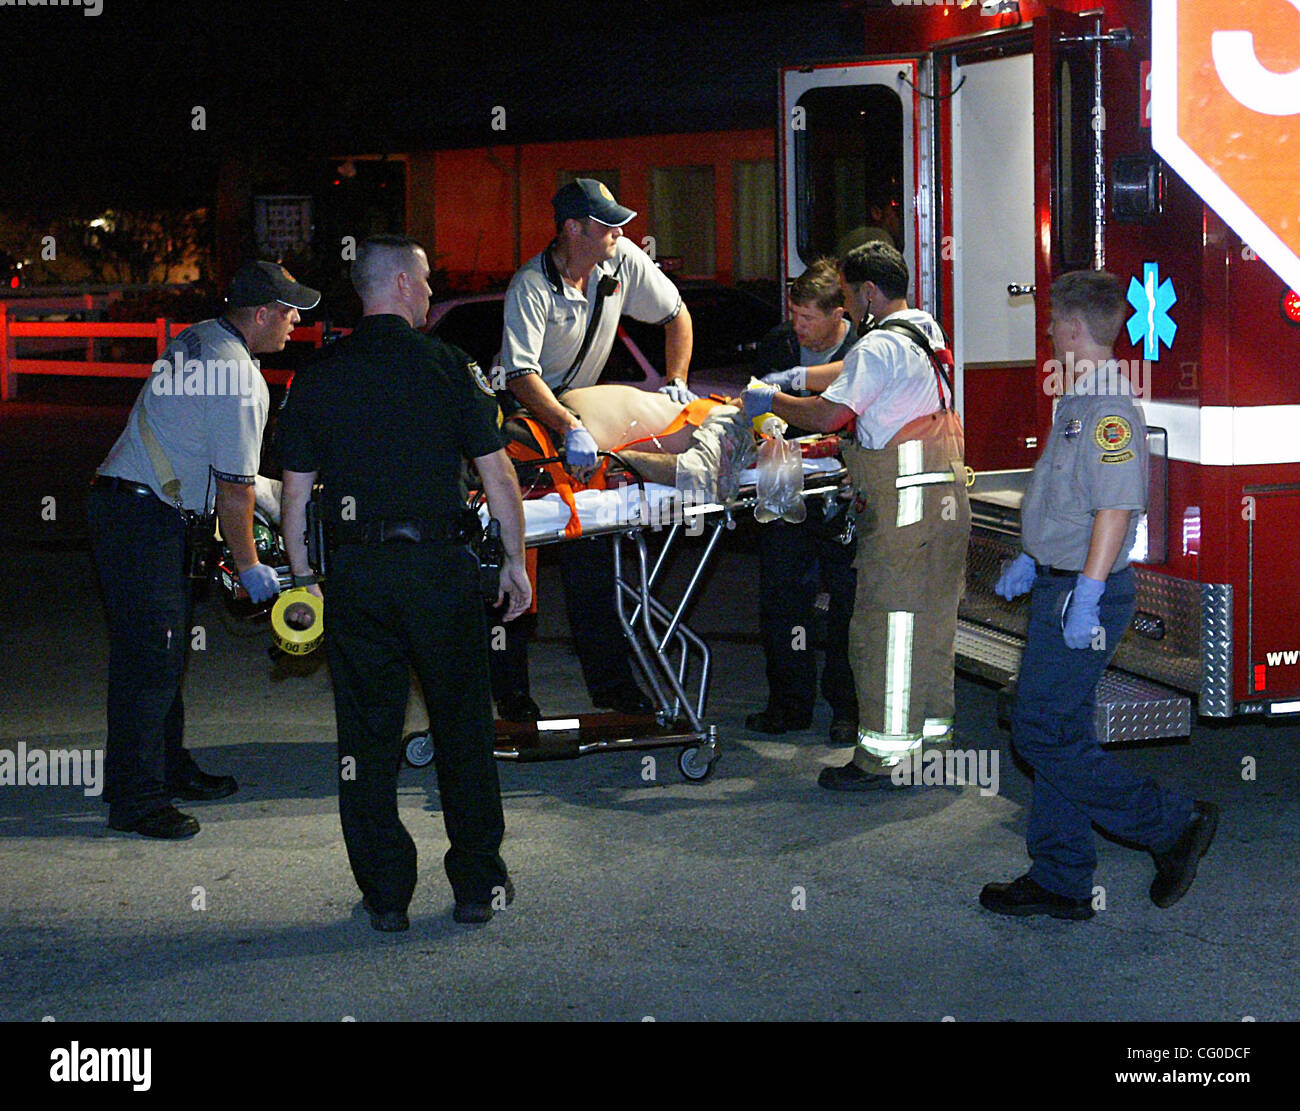 062407 met drowning  Staff Photo by Damon Higgins/The Palm Beach Post   0039781A - West Palm Beach - Palm Beach County fire rescue workers prepare to transport the second of two victims to a local hospital that divers pulled from a lake Sunday evening at Lakeside of the Palm Beaches (2156 Okeechobee Stock Photo